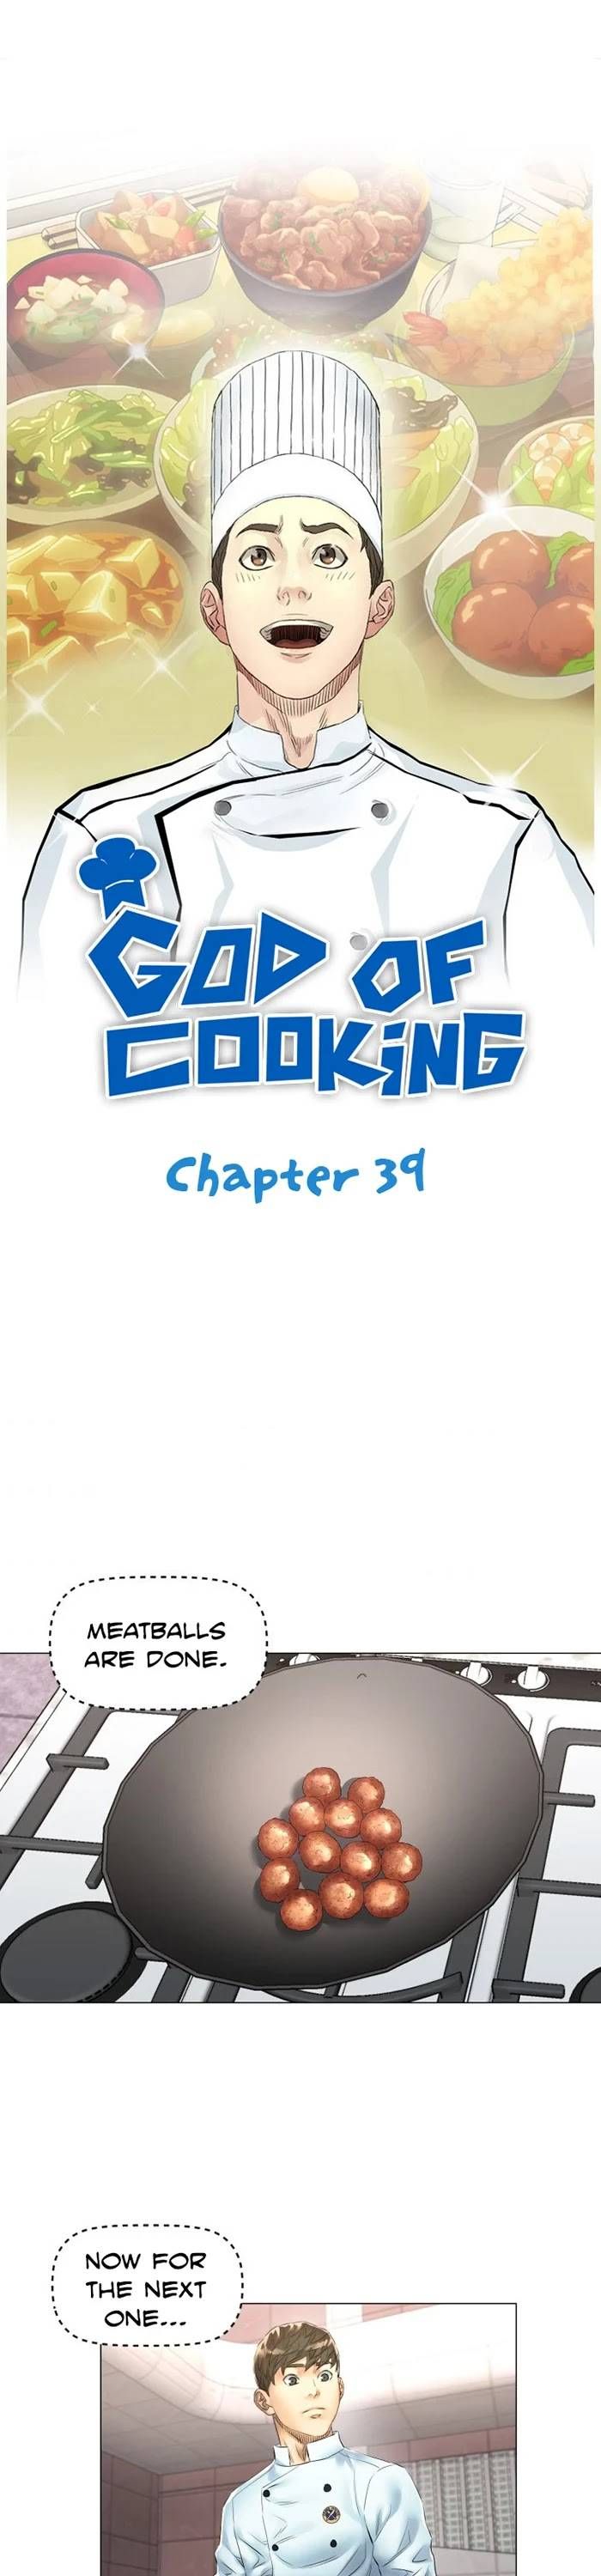 God of Cooking Chapter 39 page 1